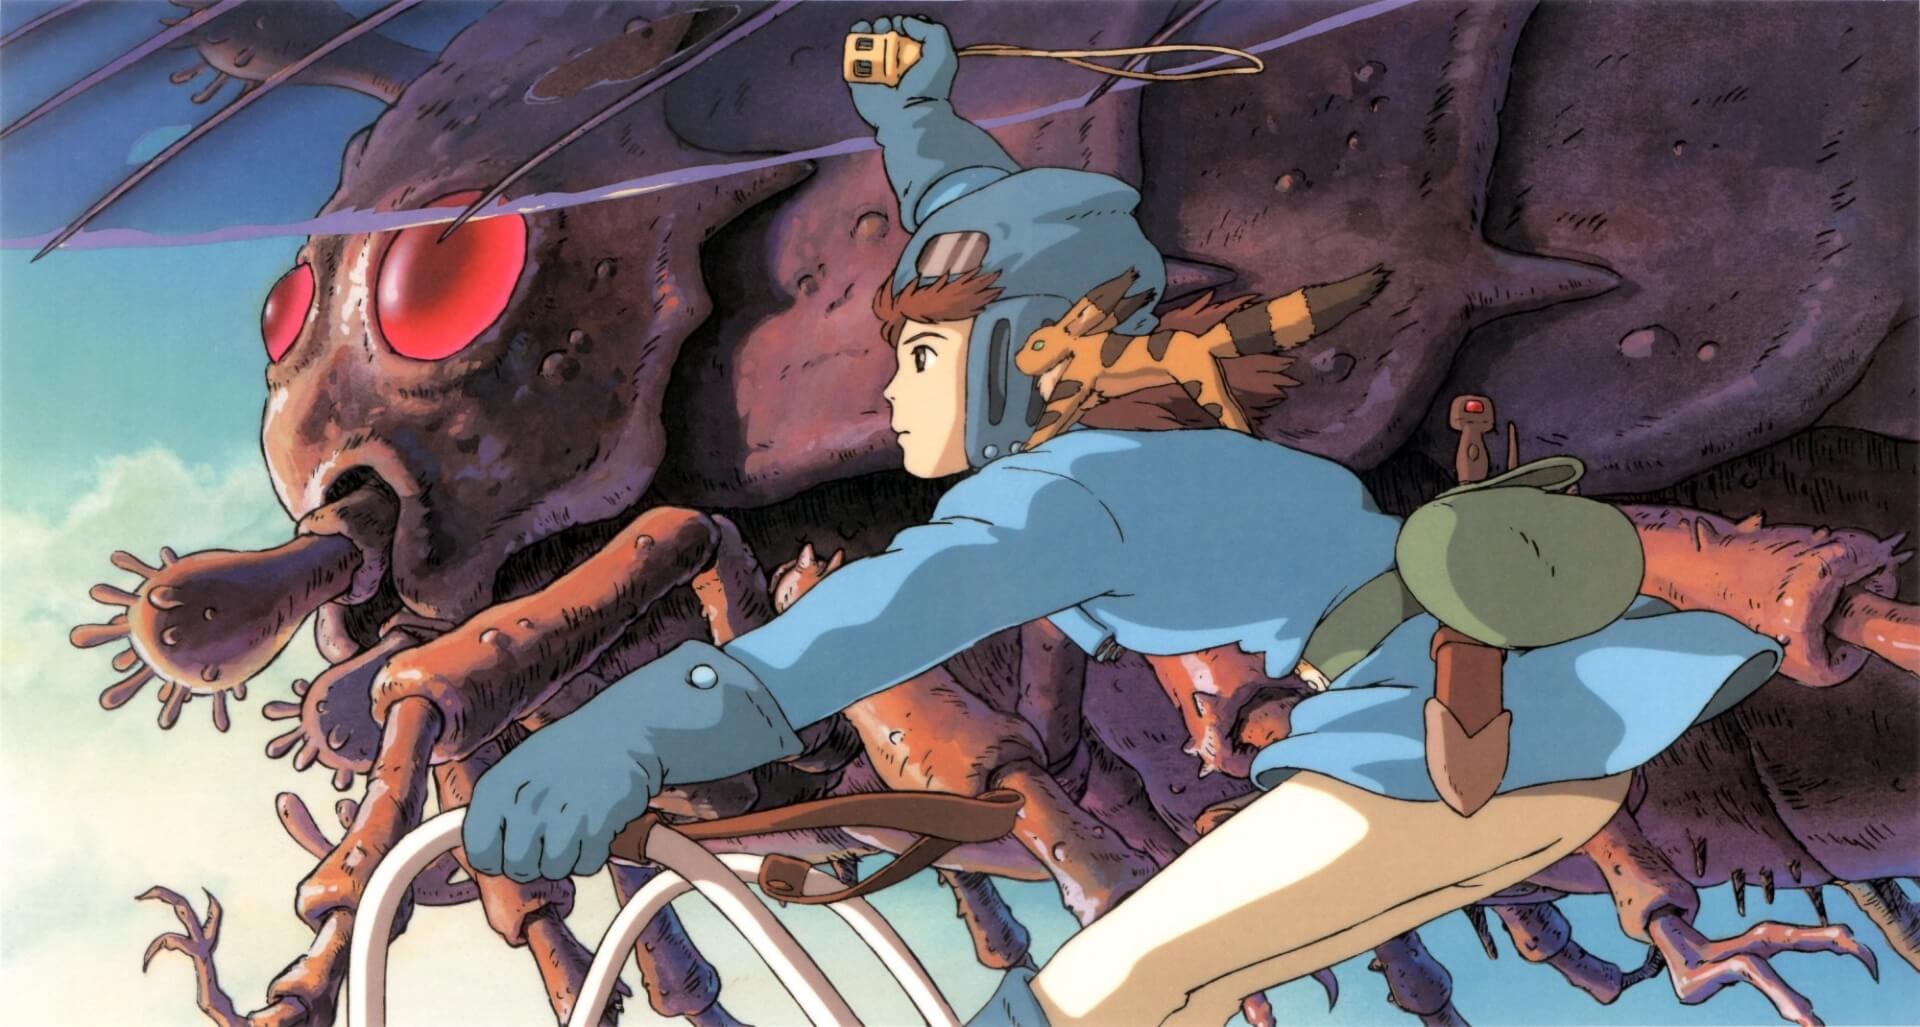 NAUSICAÄ OF THE VALLEY OF THE WIND